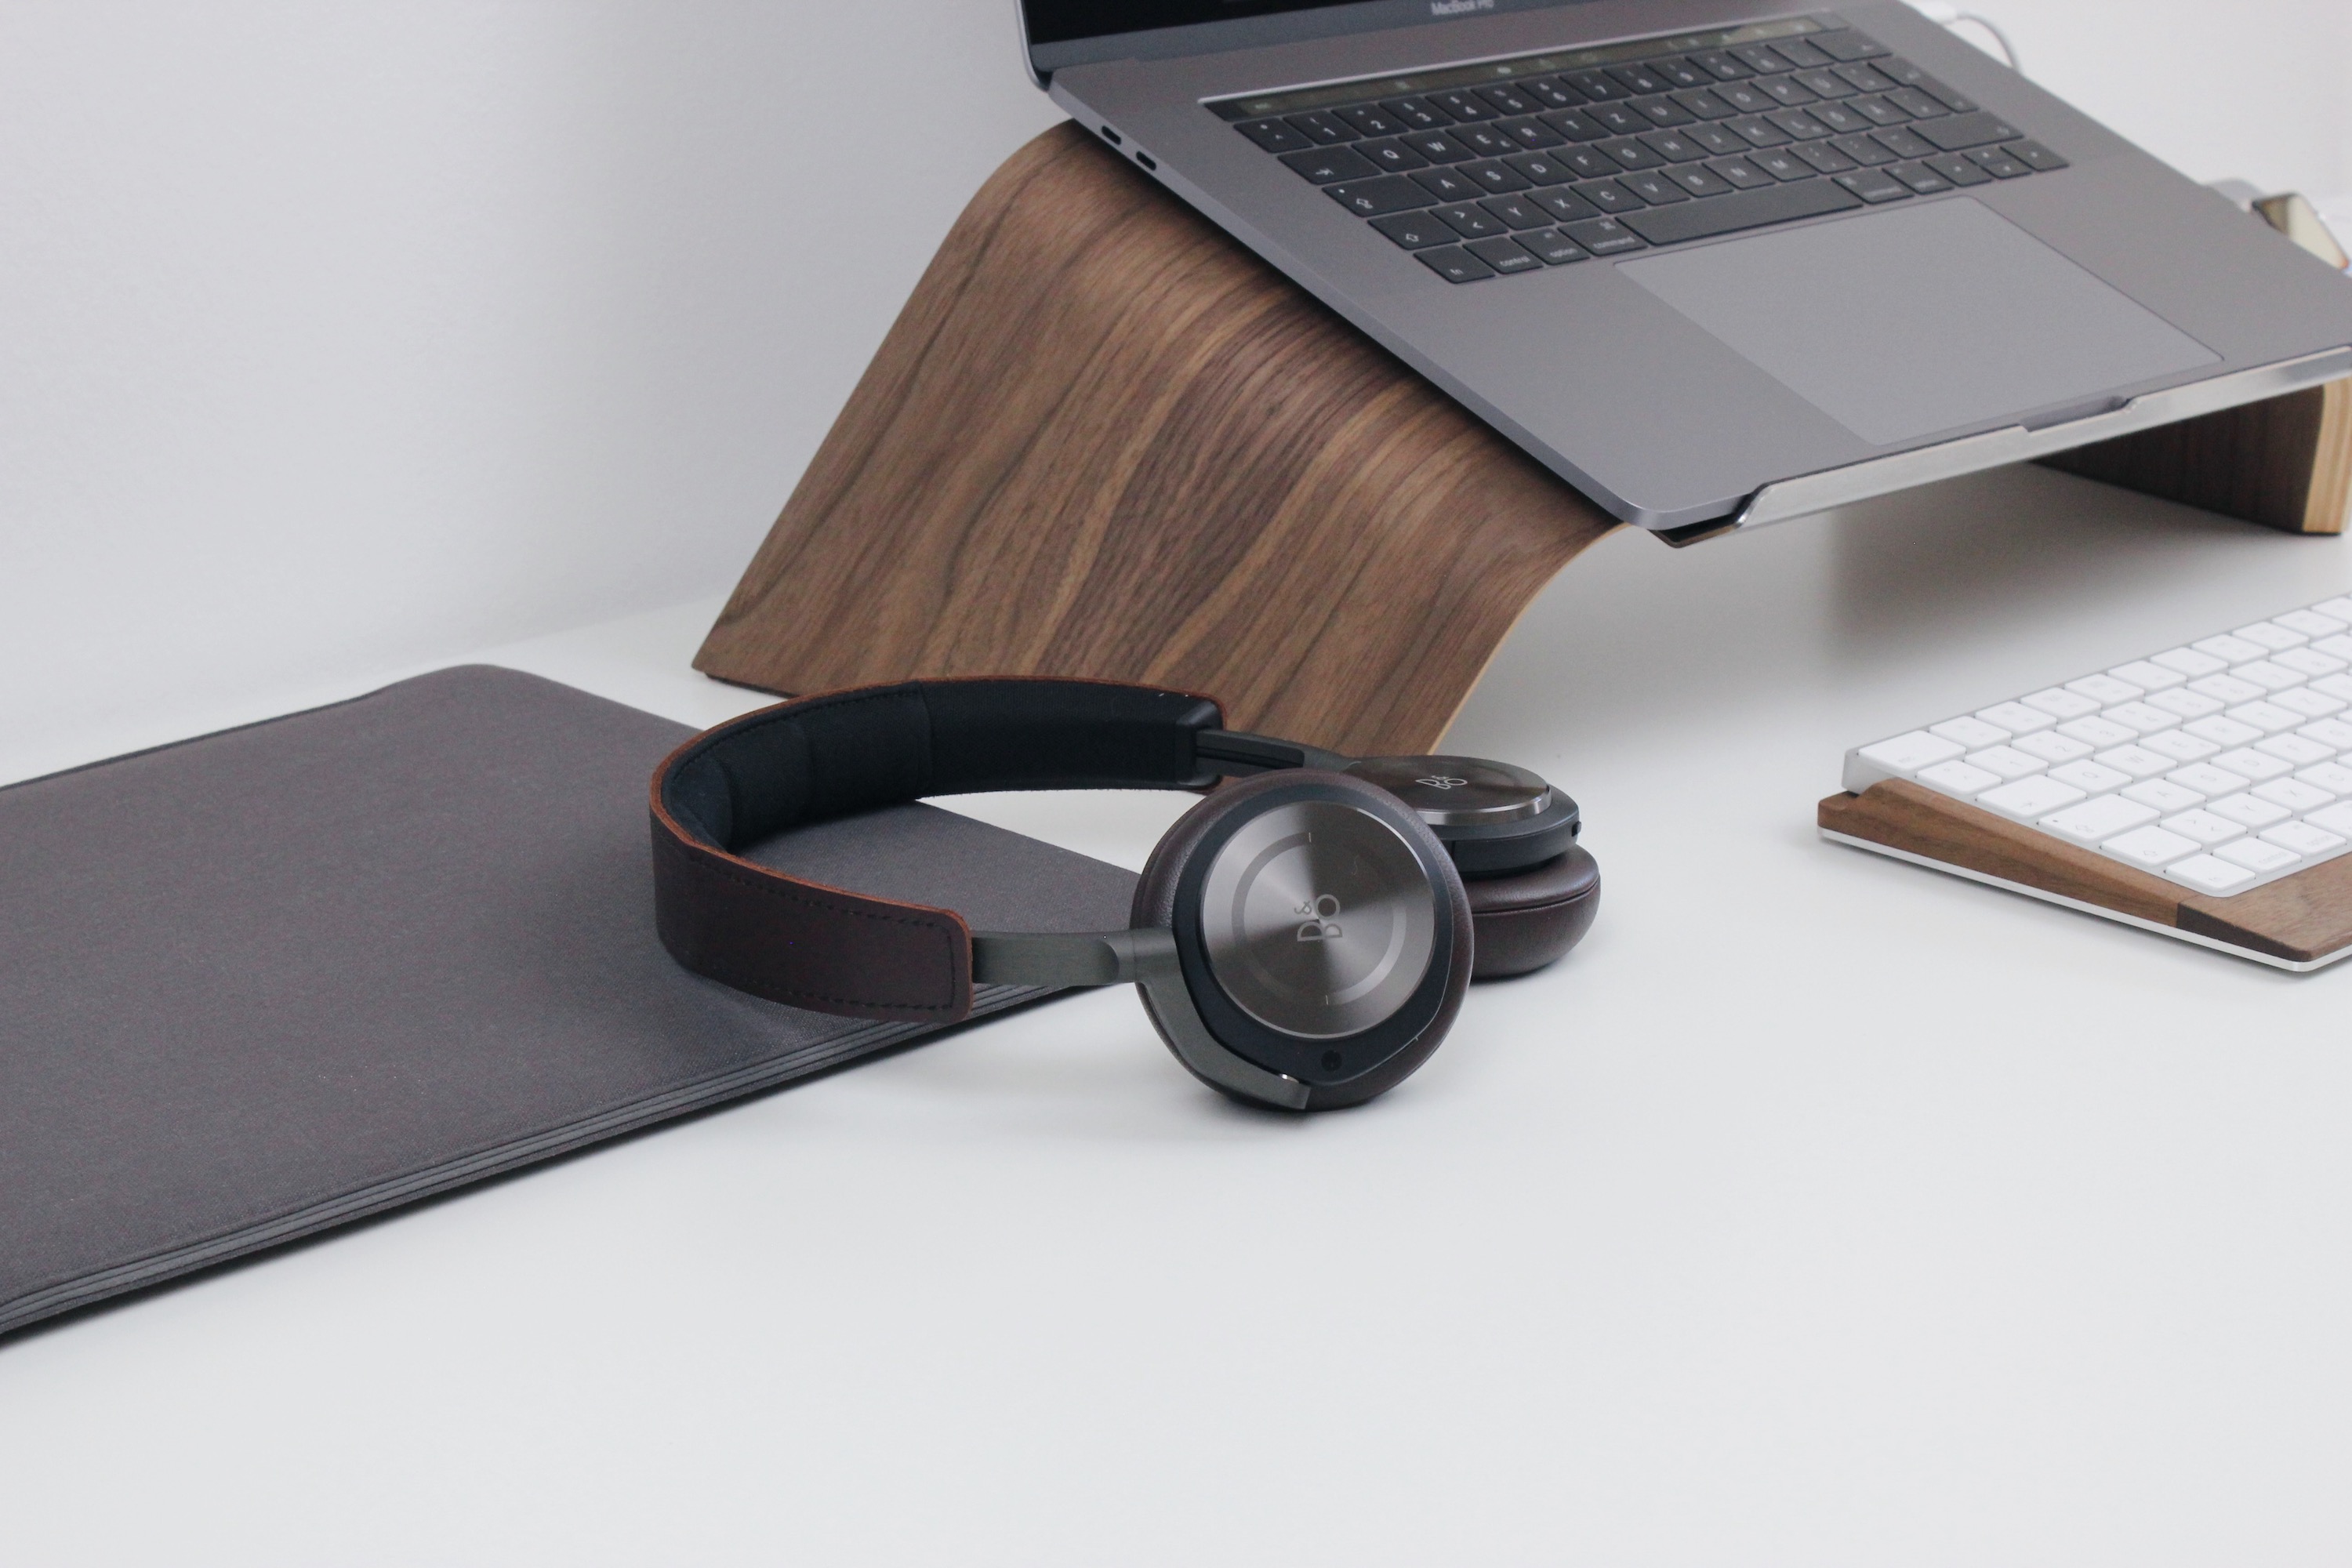 Bang & Olufsen BeoPlay H8 Headphones - Beauty of Technology